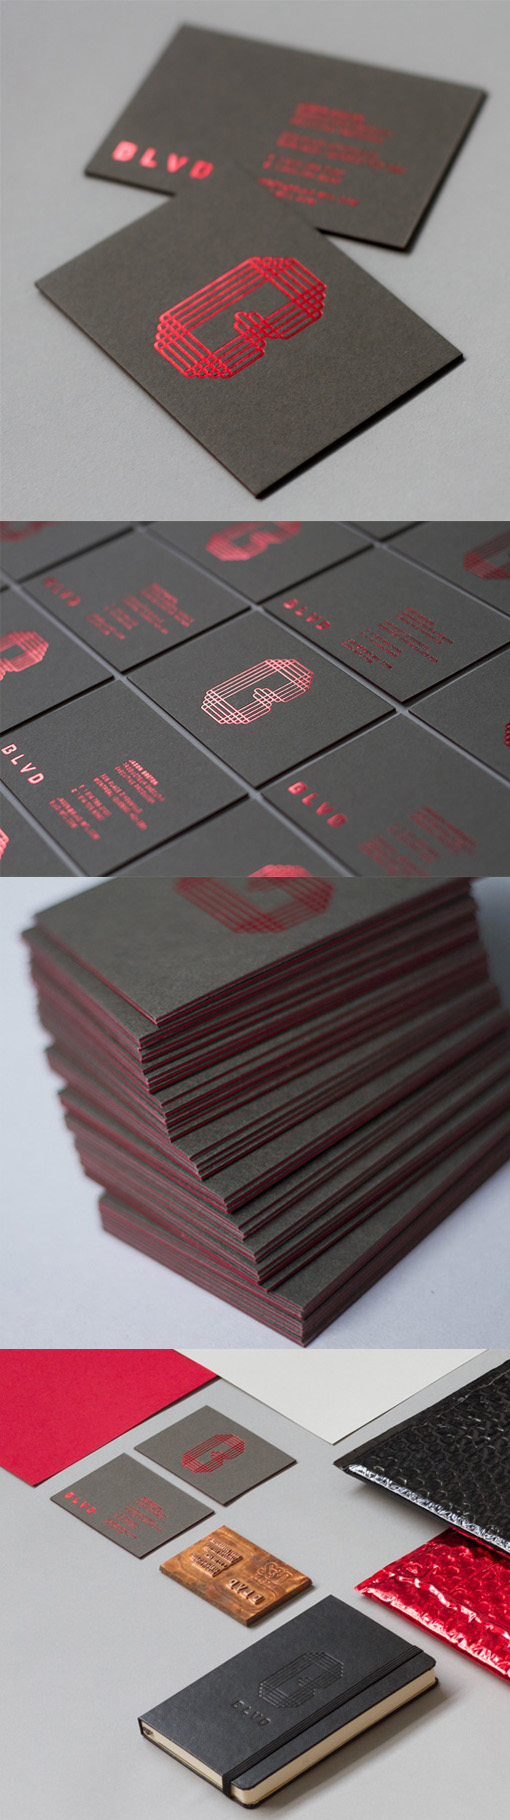 Black And Red Foil Embossed Minimalist Business Card For A Film Production Studio